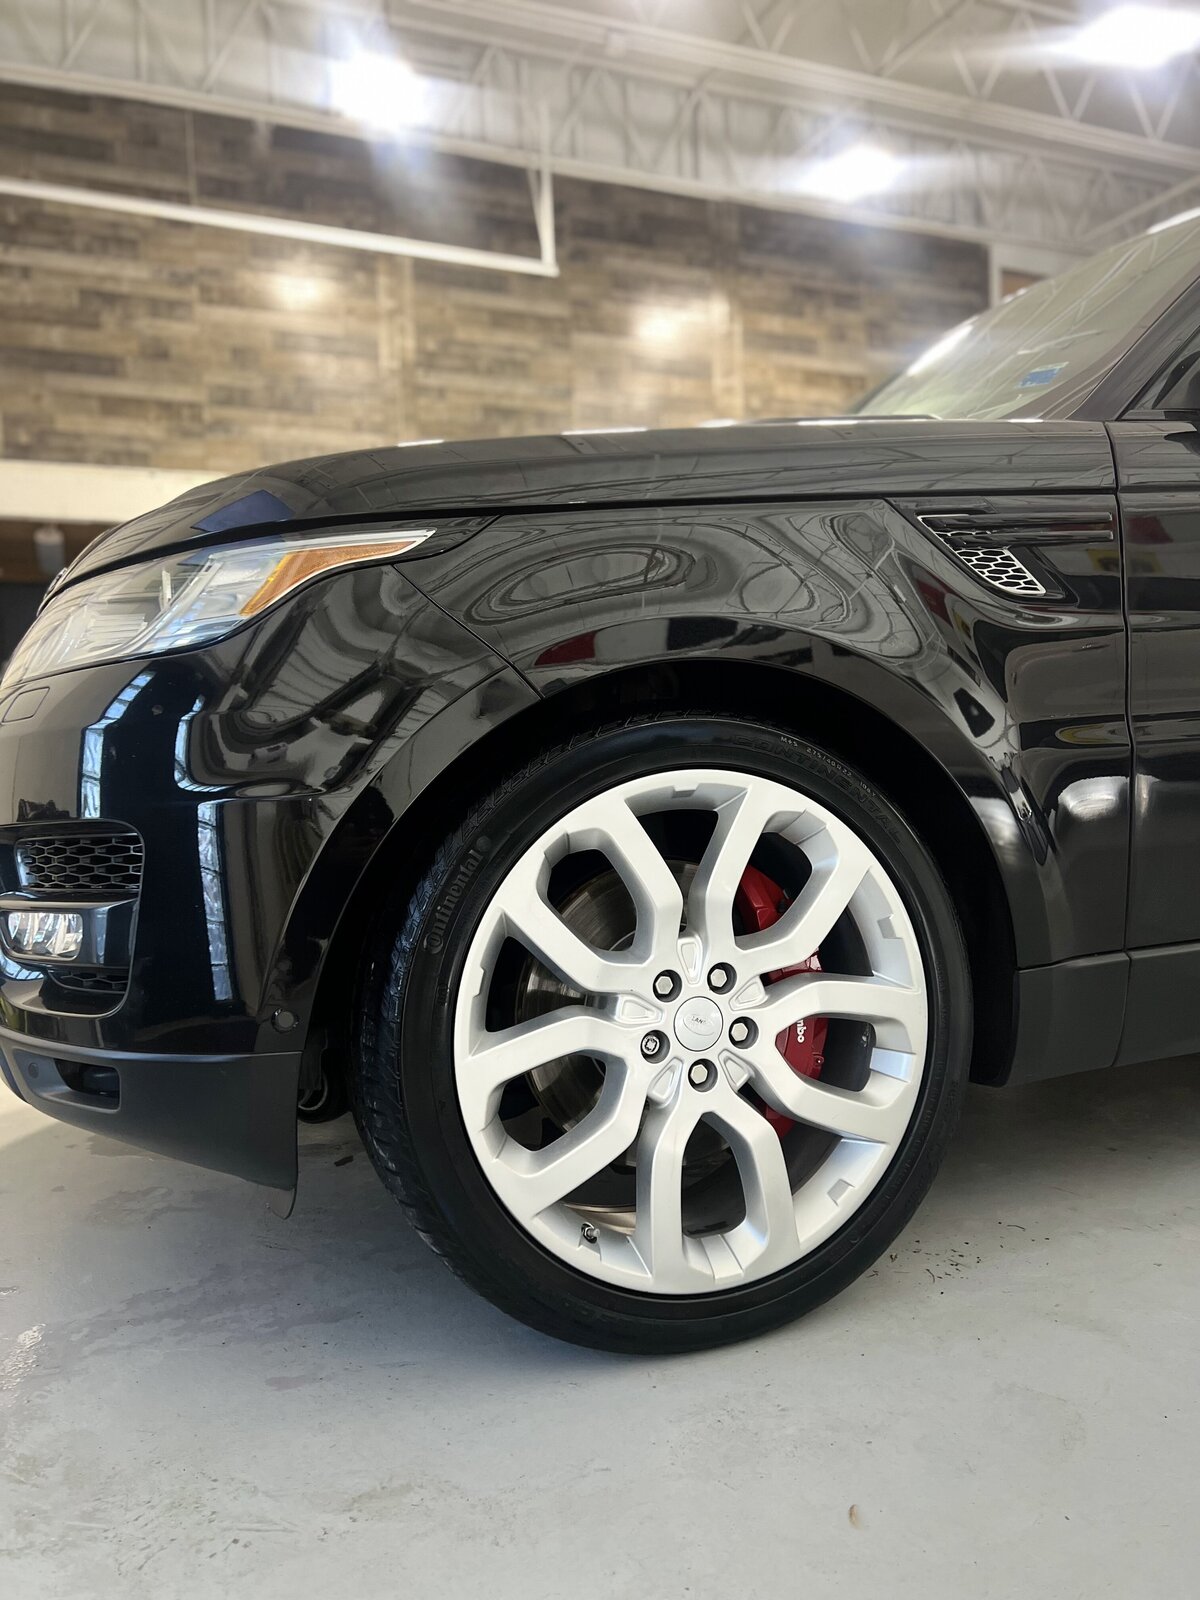 a-nice-touch-auto-detailing-paint-correction-black-range-rover-rim-polish-north-haven-ct